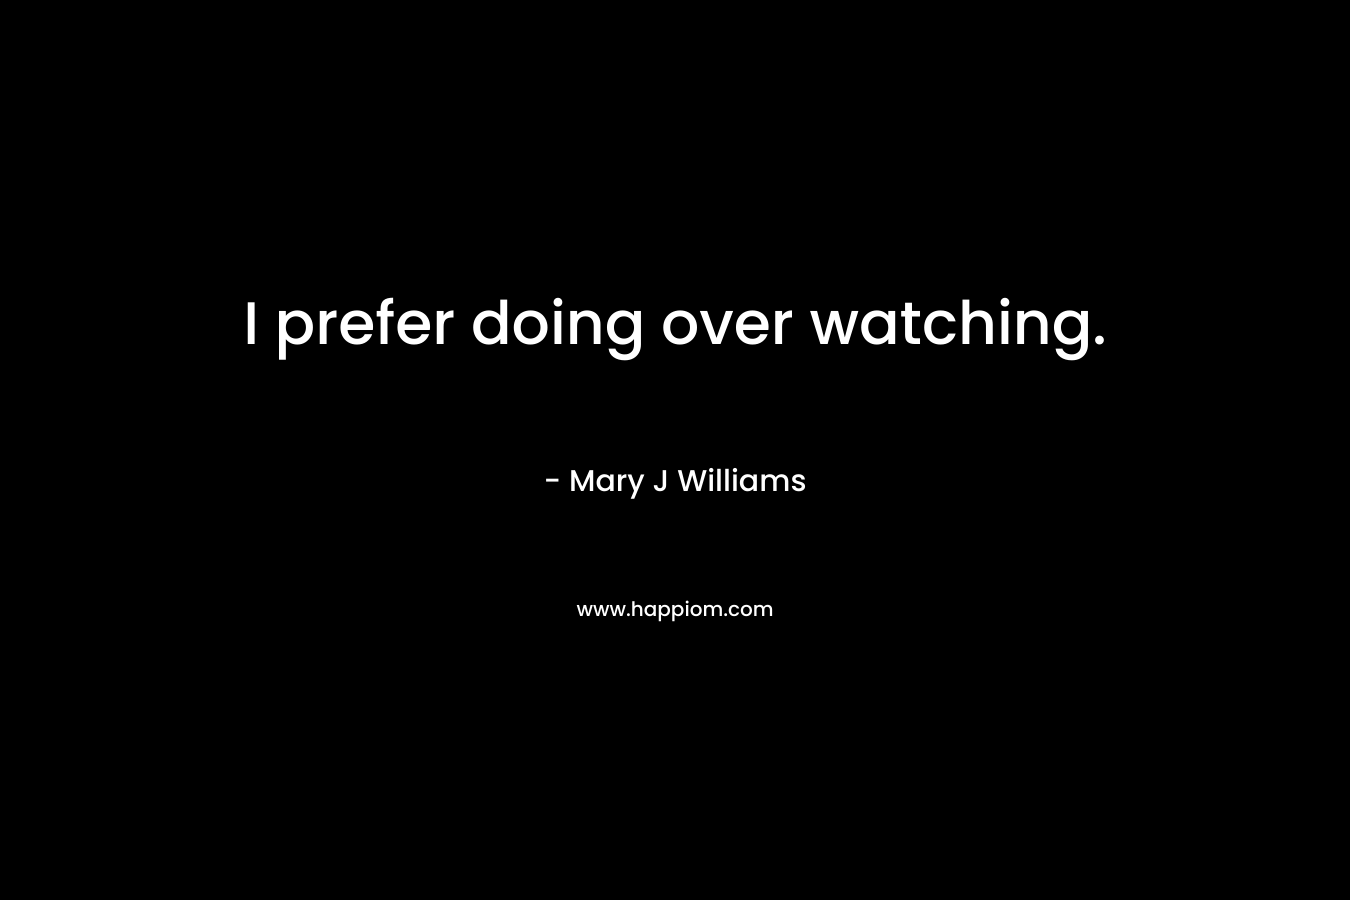 I prefer doing over watching.